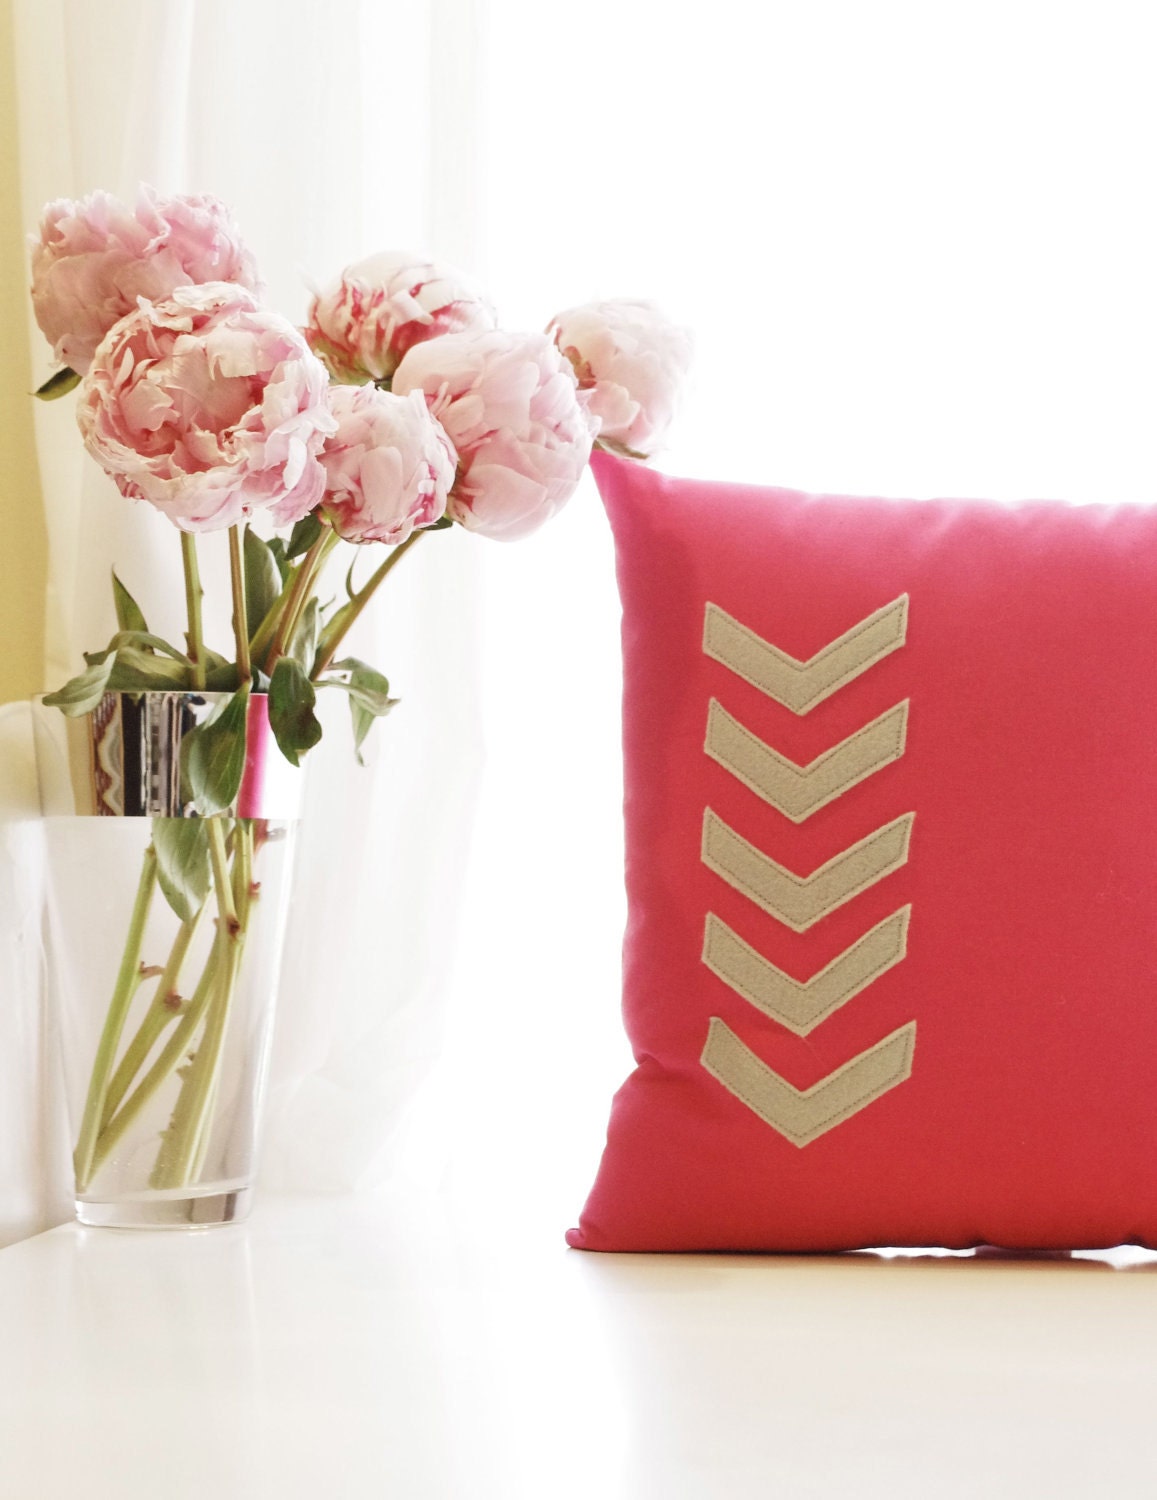  Pillow Hot Pink and Grey Decorative Pillow Great for Wedding Decor